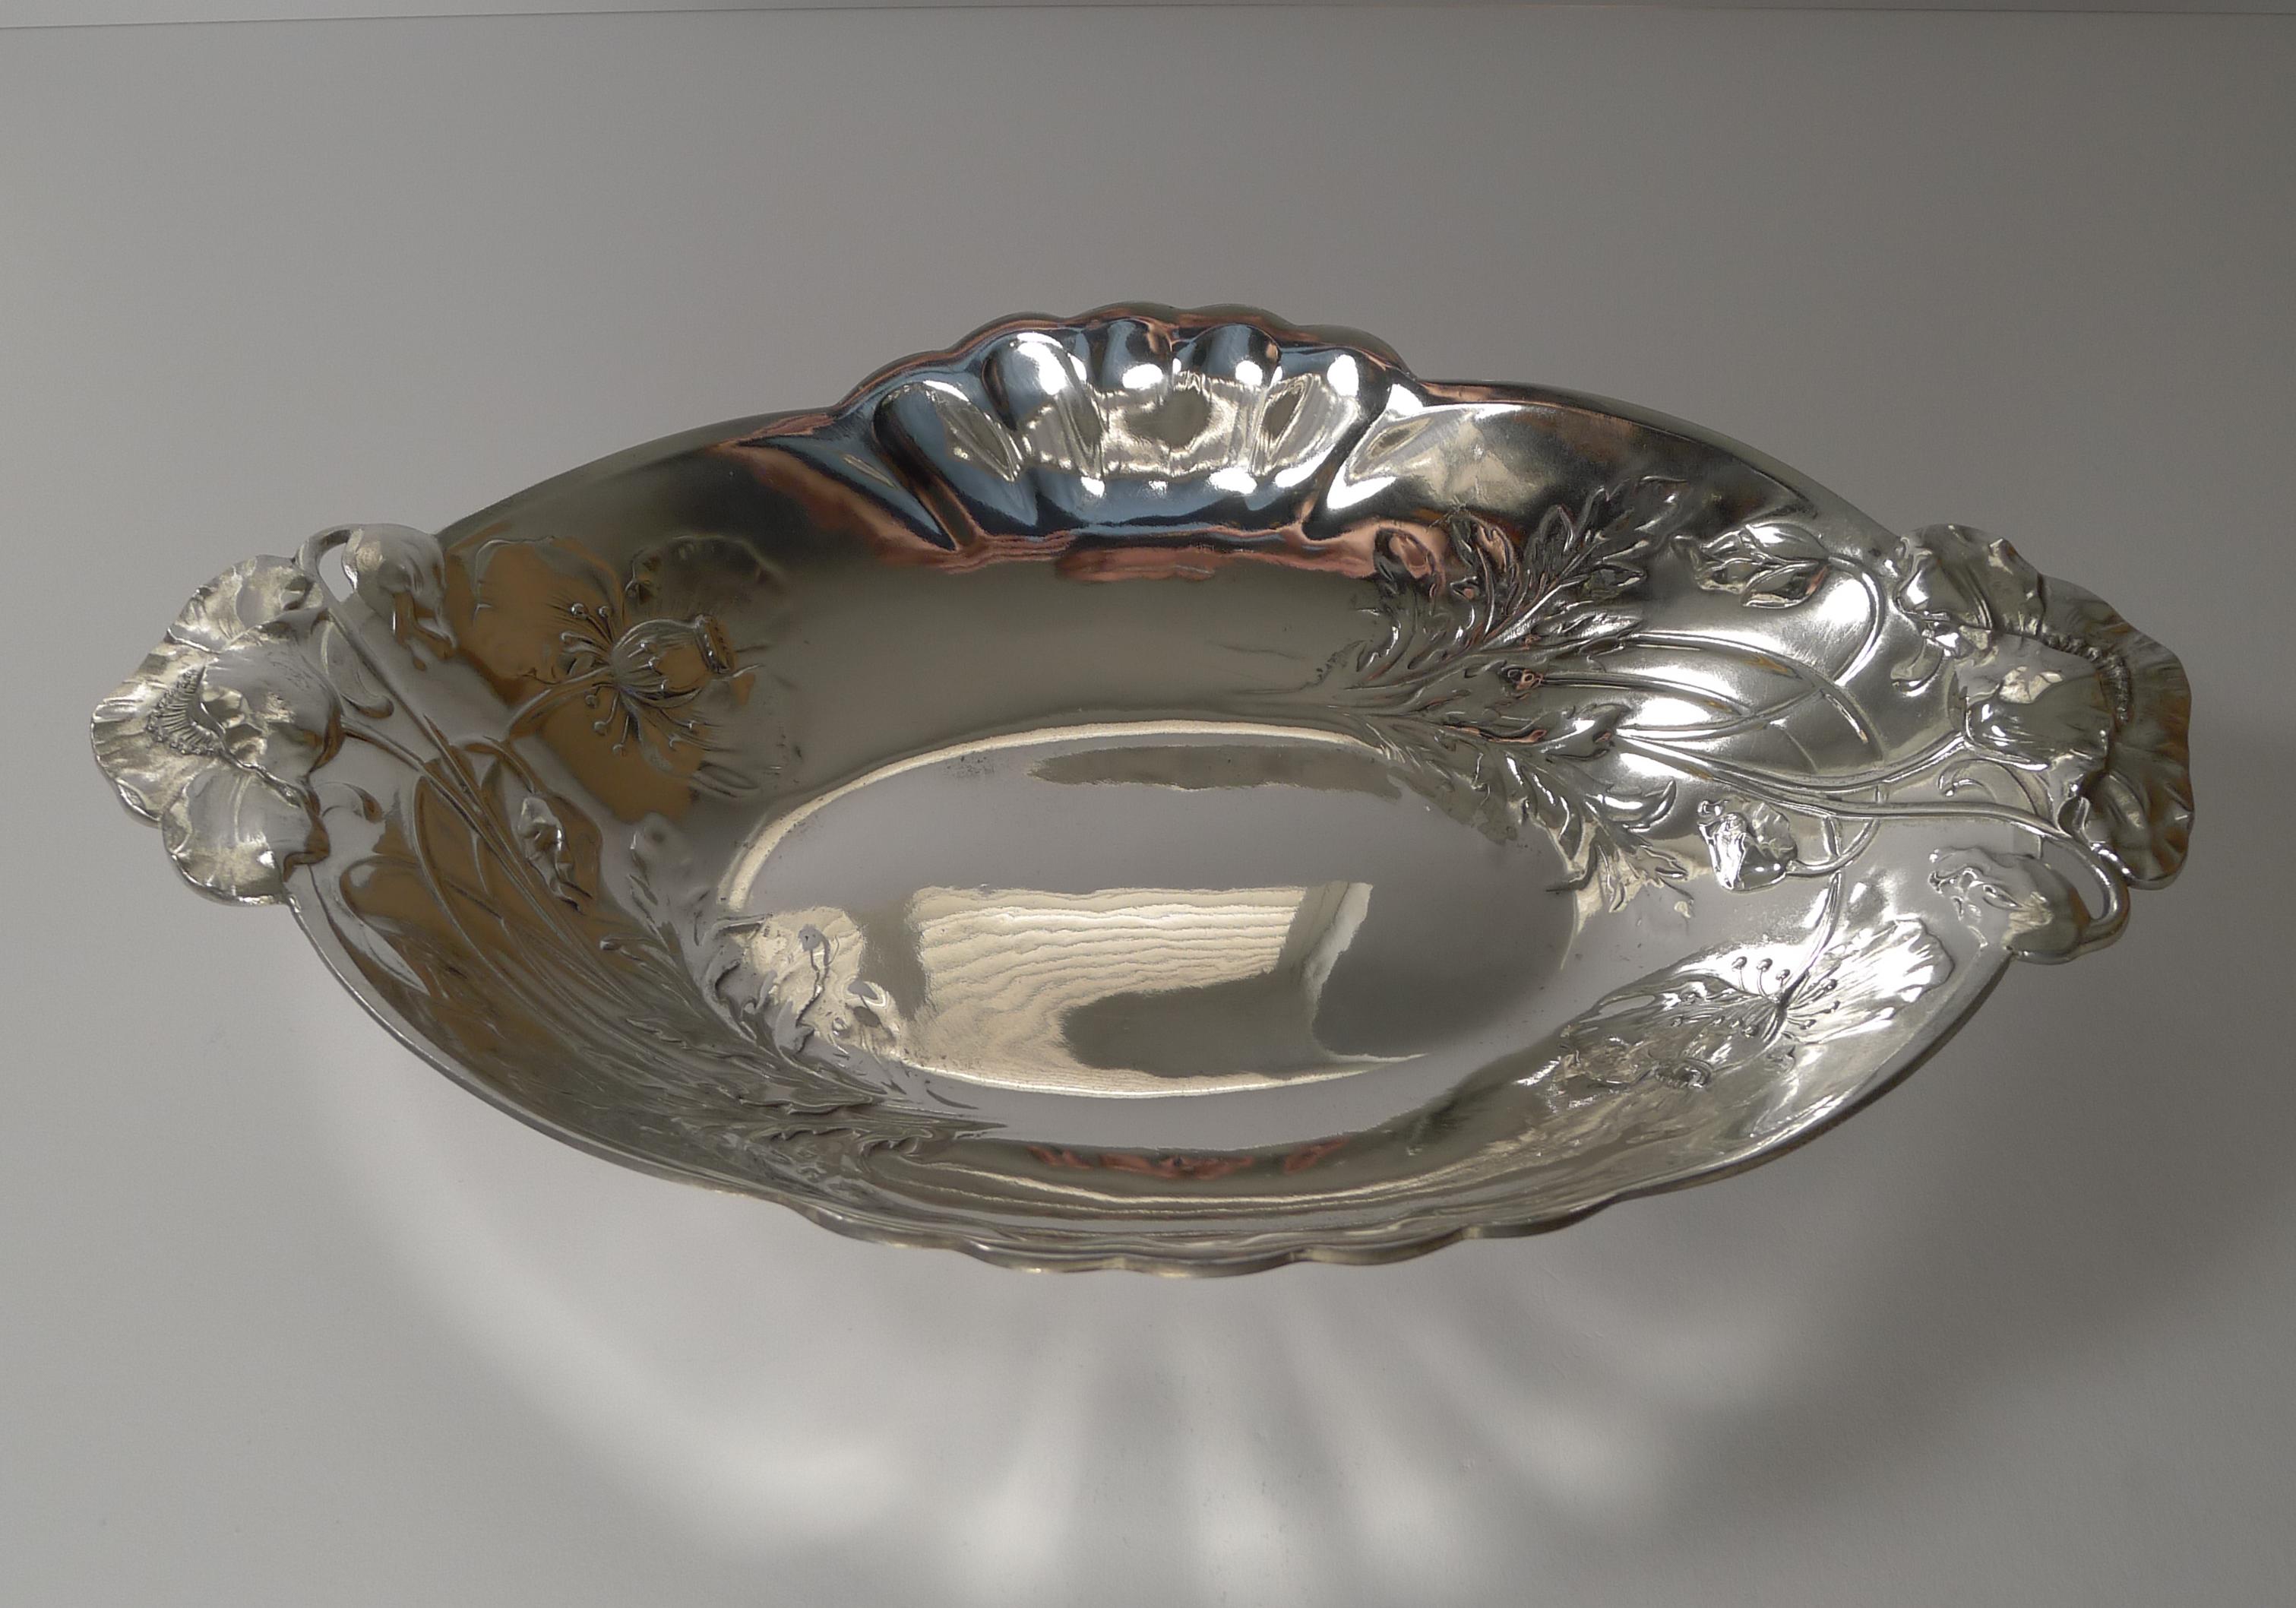 A magnificent French Christofle Gallia bread basket beautifully decorated with a stylish Art Nouveau Poppy design.

Just back from our silversmith's workshop where it has been professionally cleaned and polished, restoring it to it's former